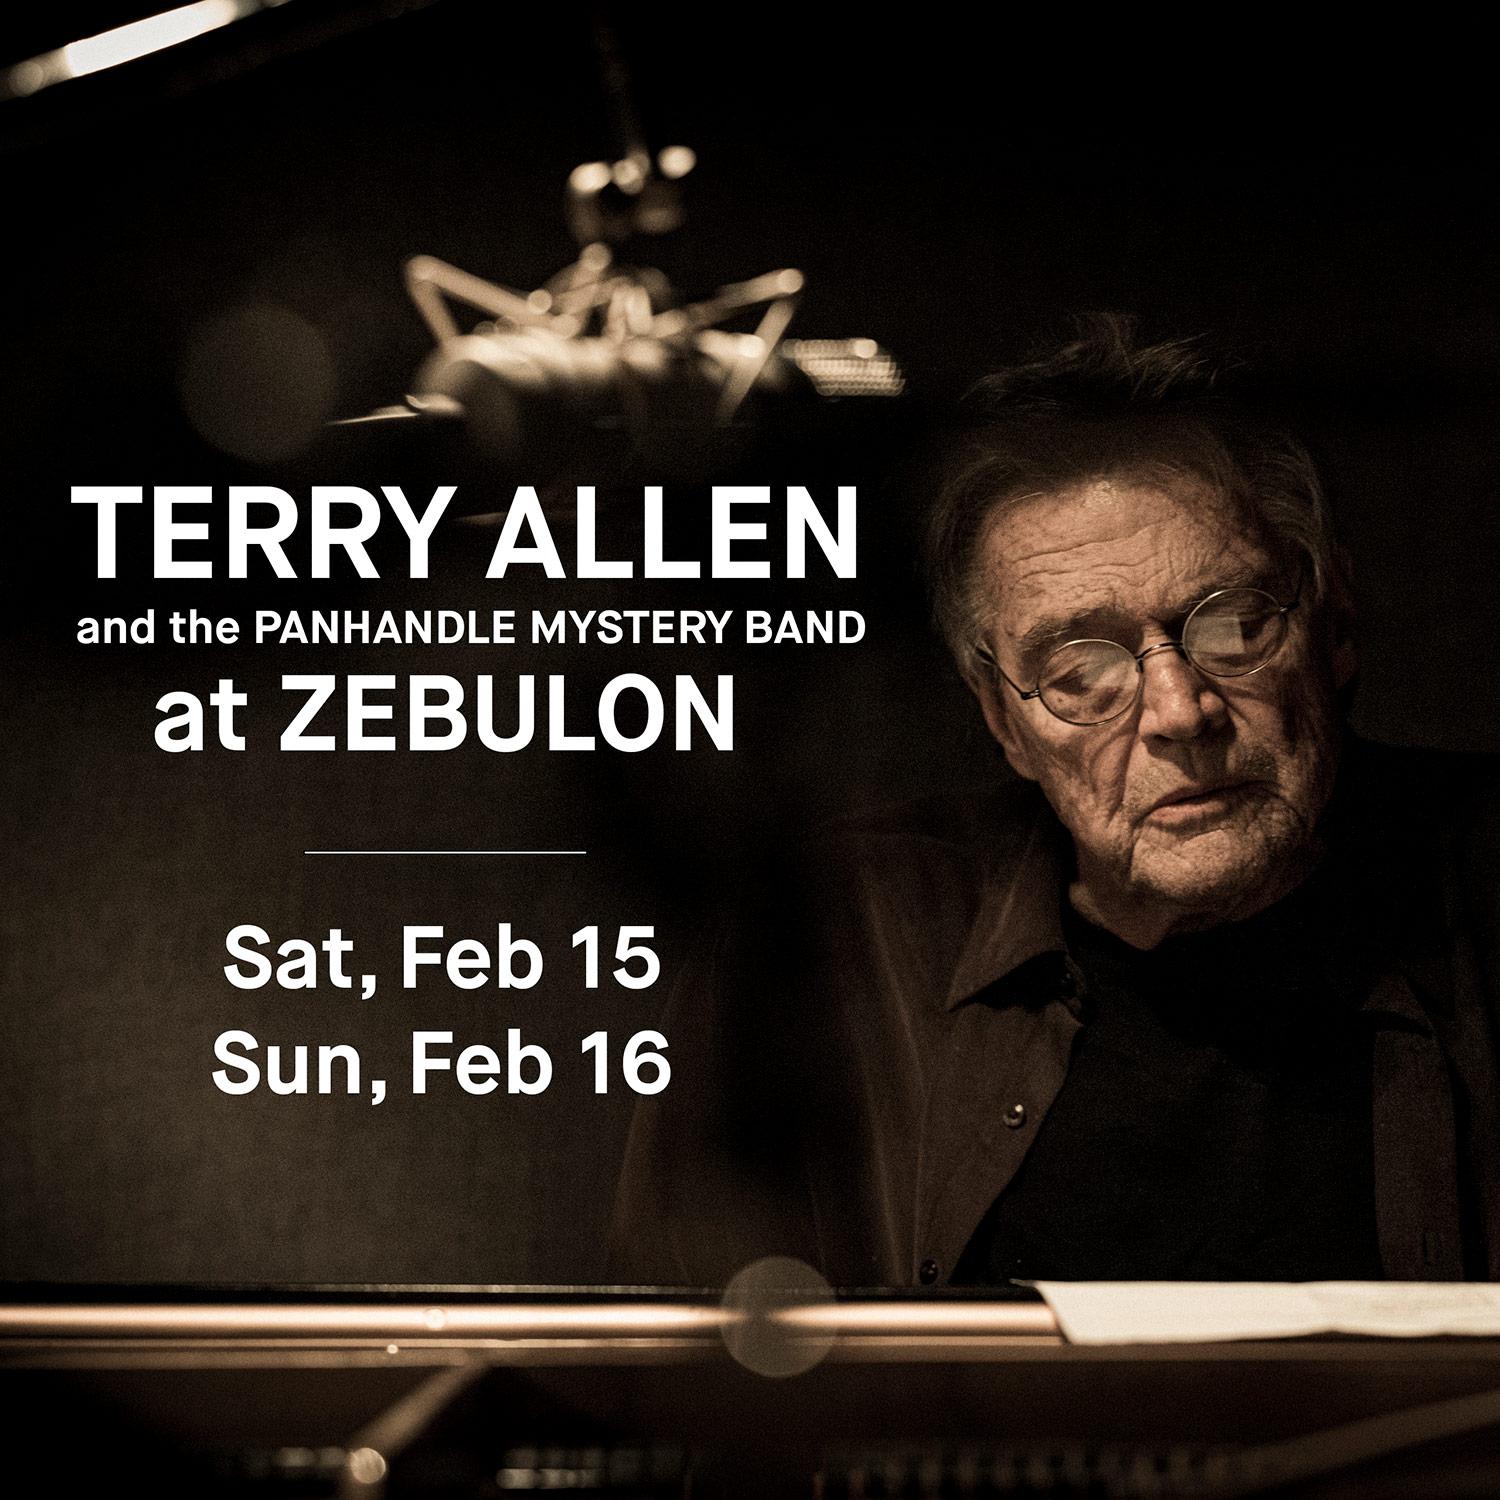 Terry Allen and the Panhandle Mystery Band